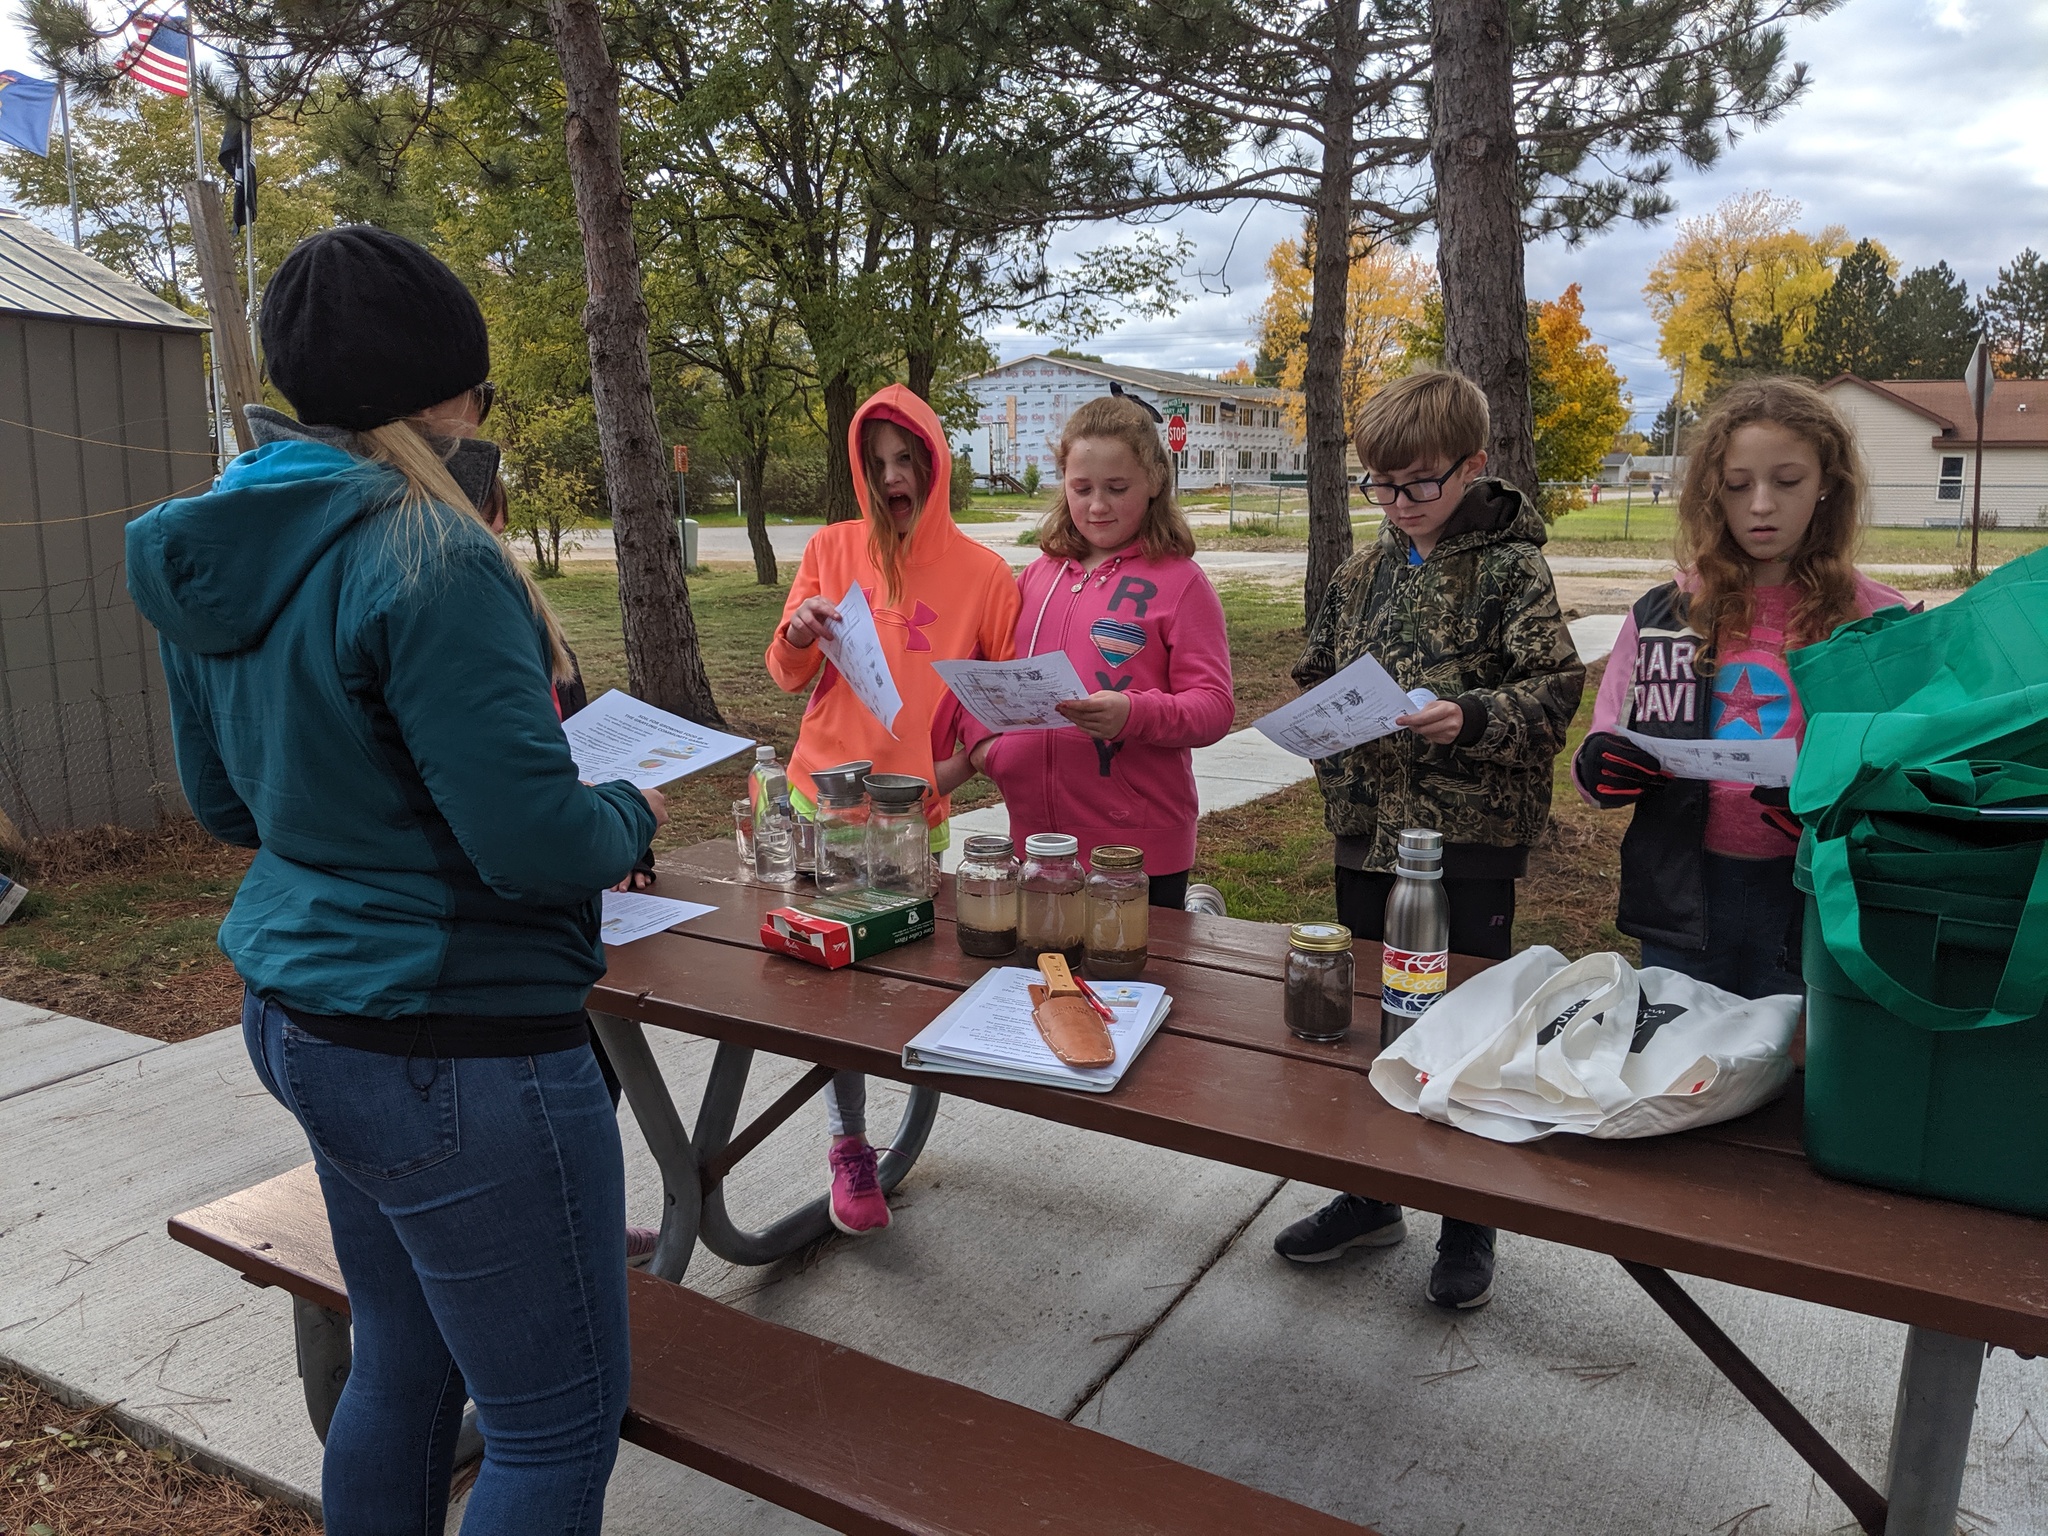 5th graders in the Huron Pines Healthy Kids After-School Program learn about different soils at the community garden - September 2020